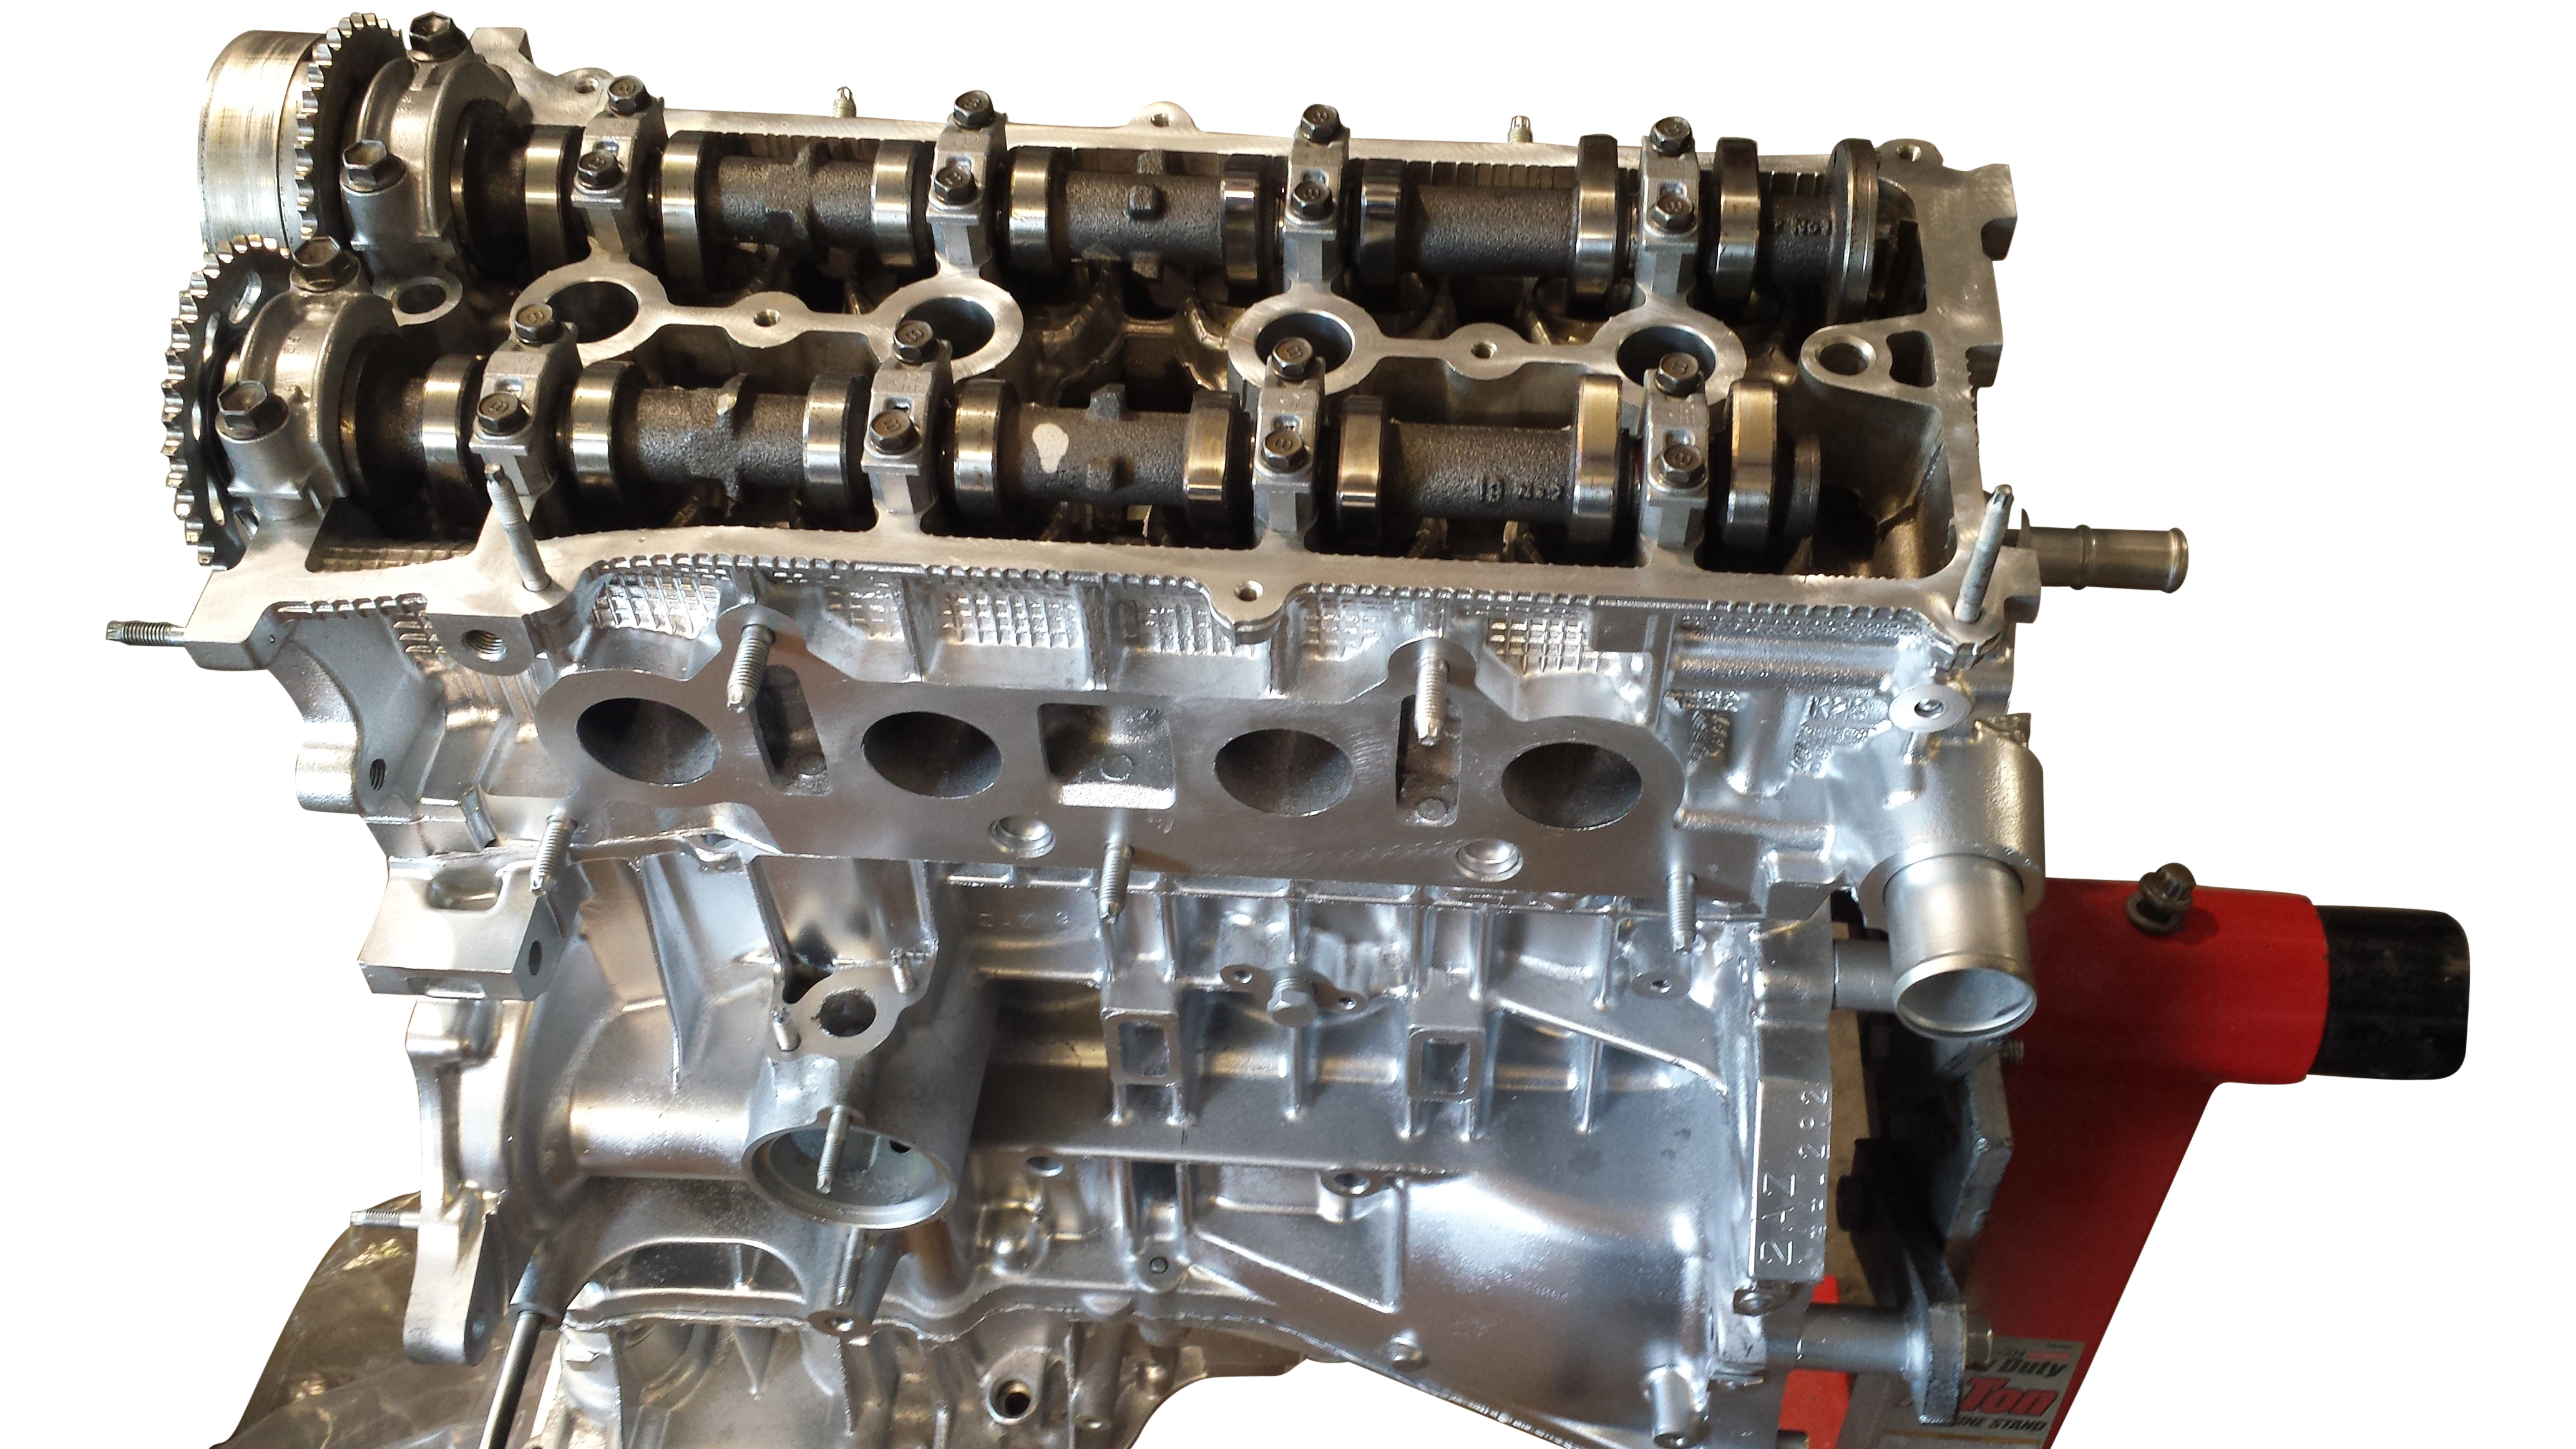 Used & Reconditioned Engines for Sale